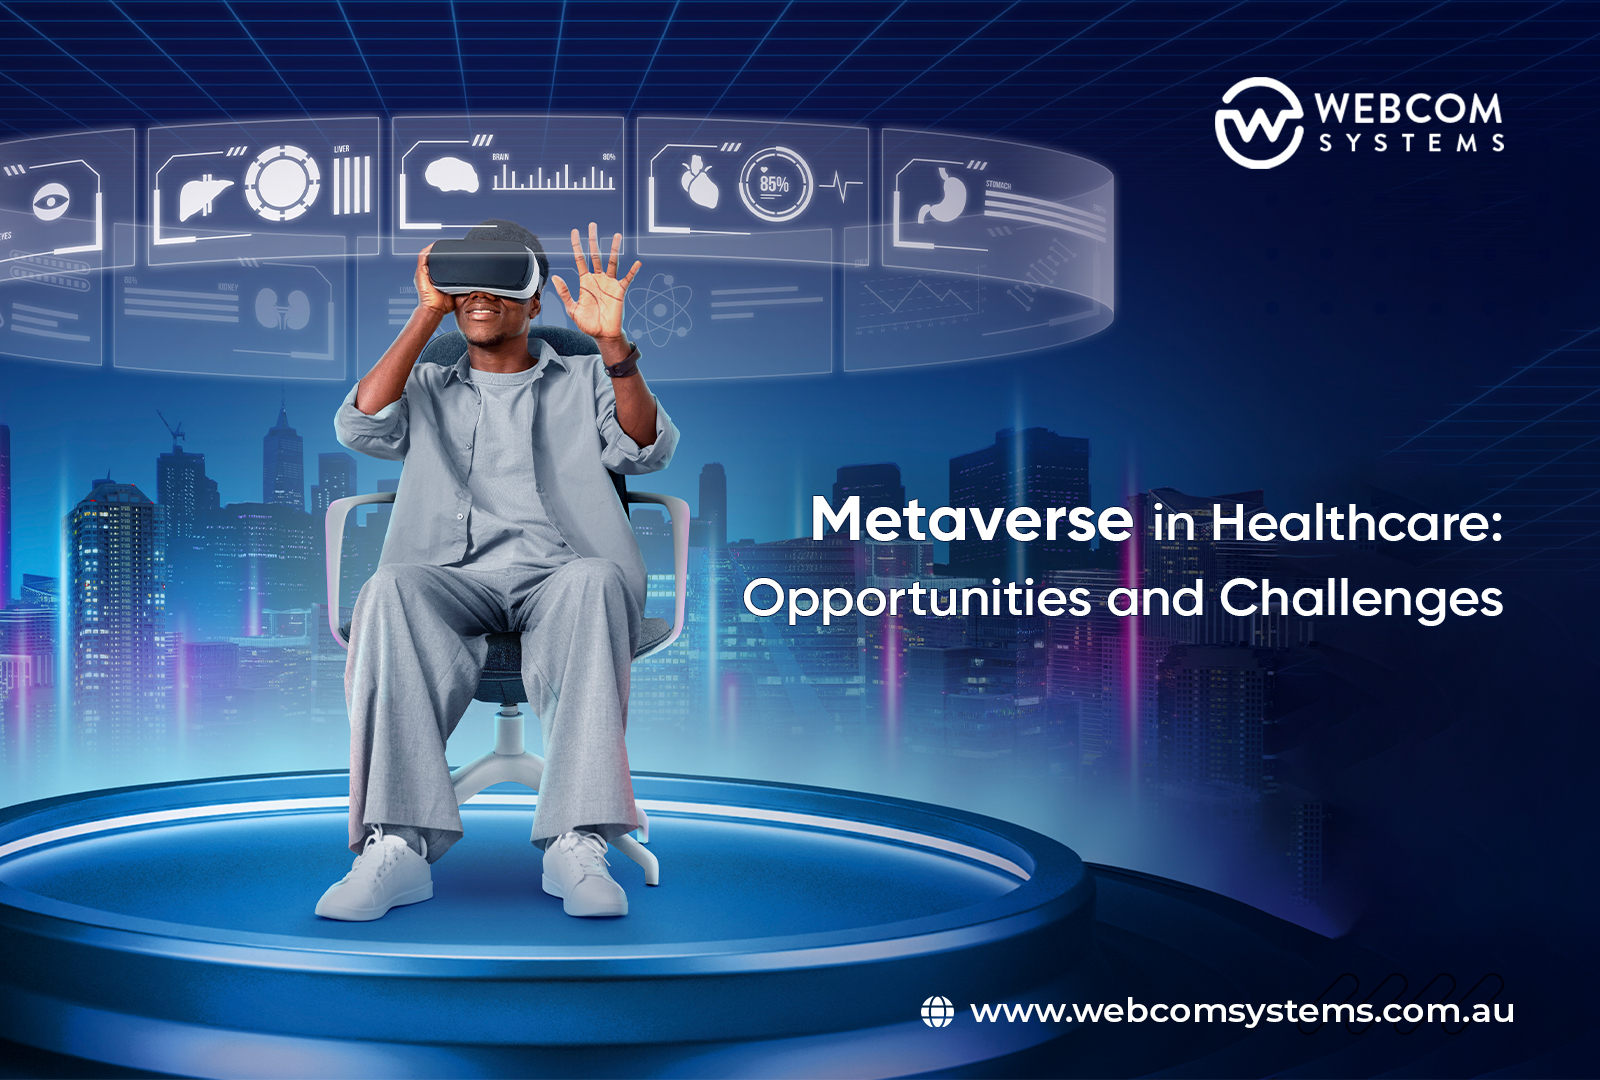 Metaverse in the Healthcare: Opportunities and Challenges